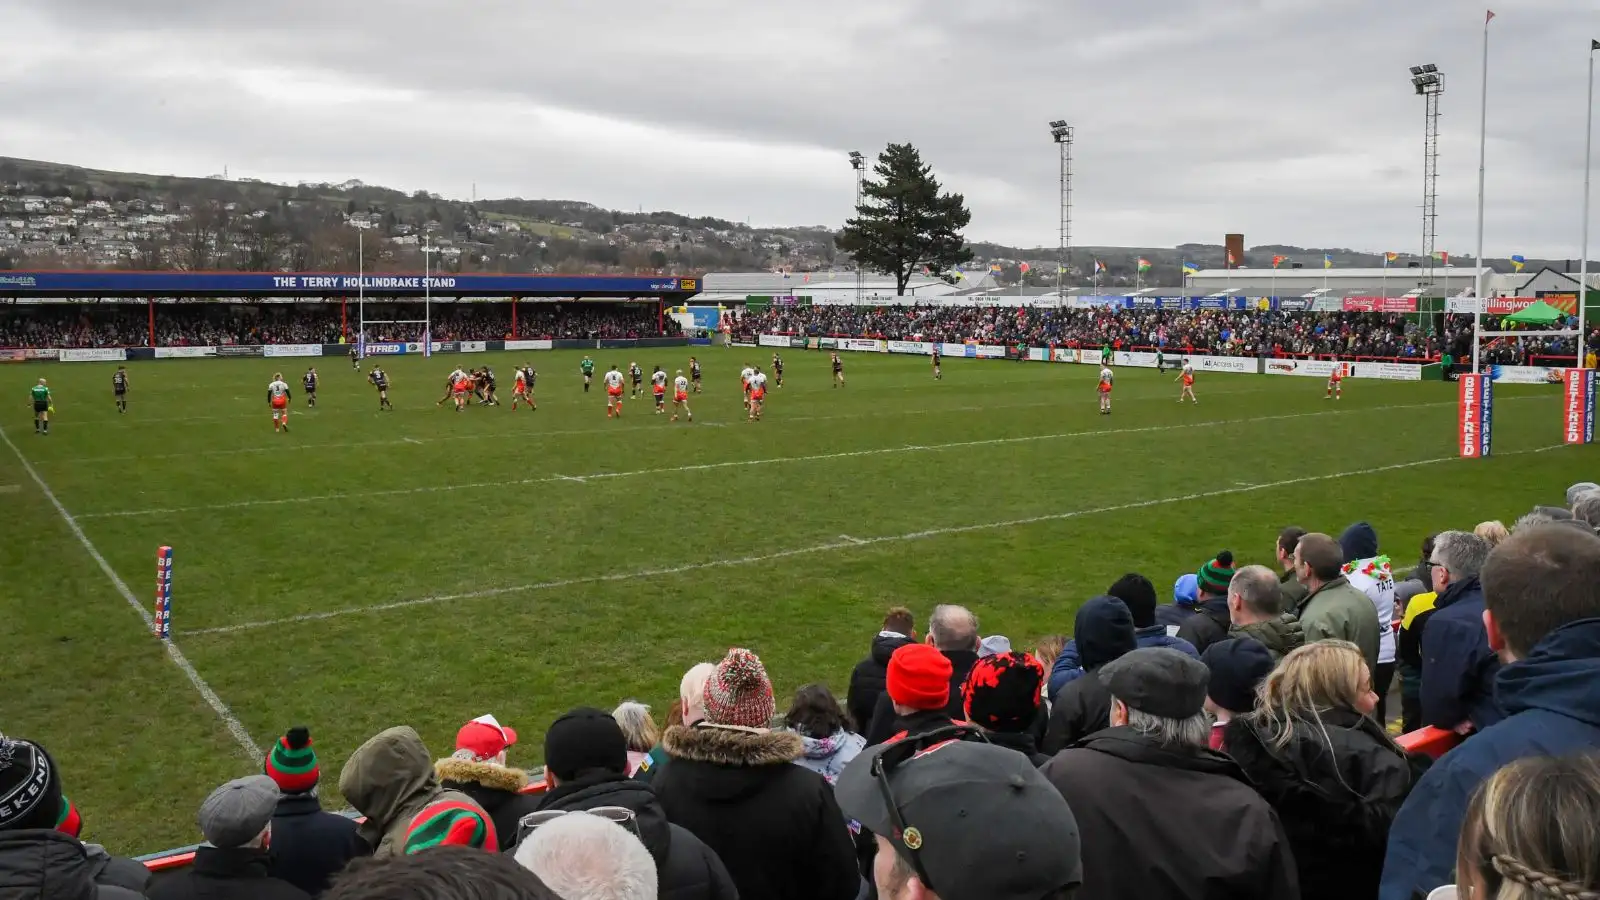 Keighley owner takes swipe at Catalans Dragons amid IMG proposals